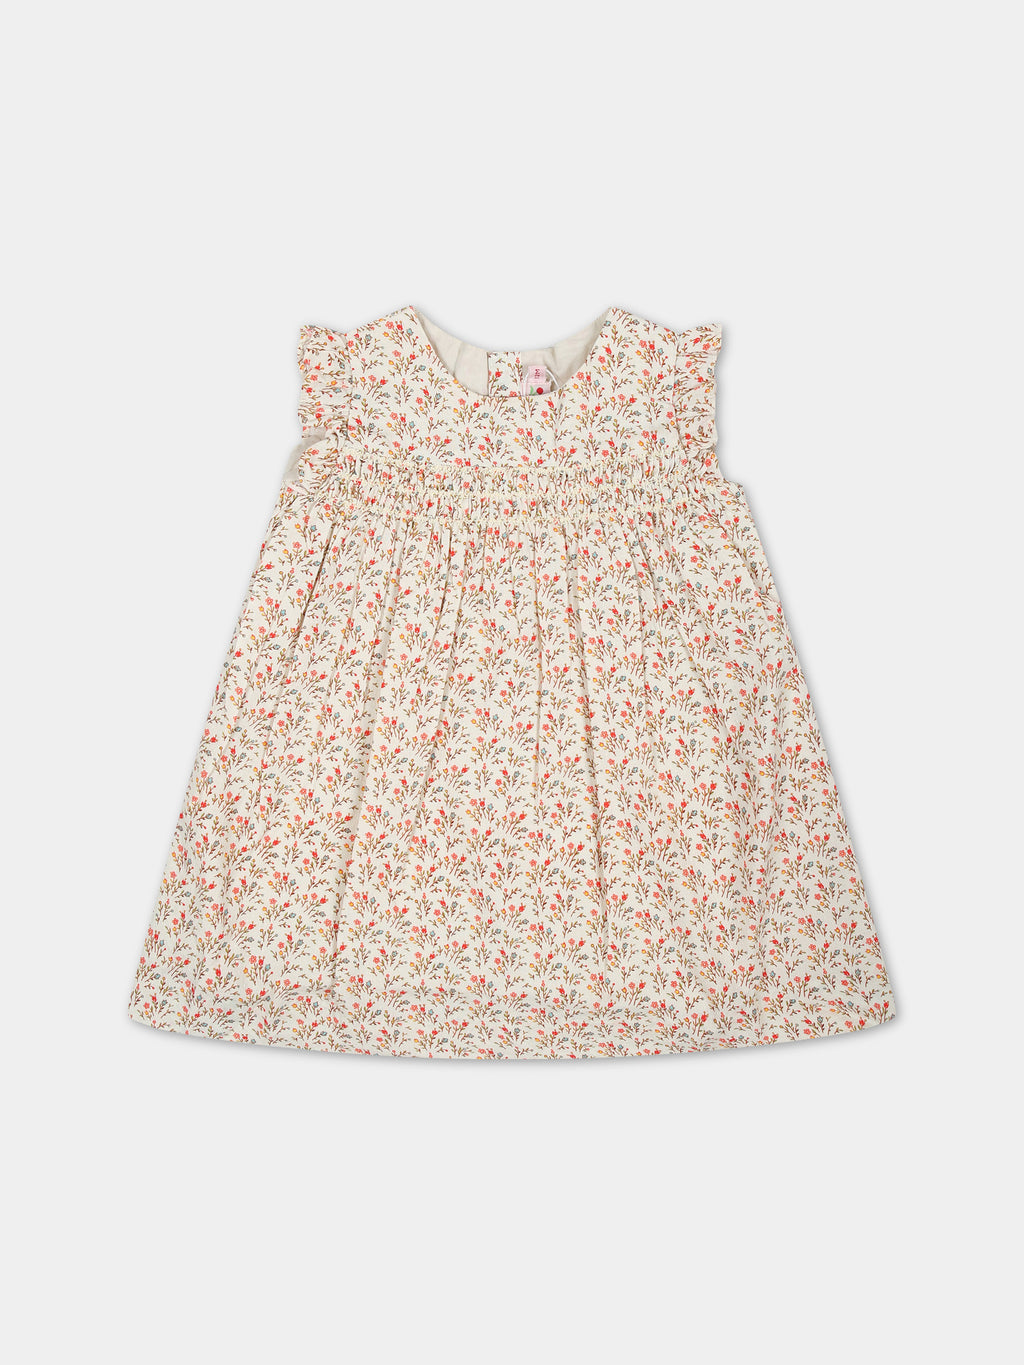 Beige dress for baby girl with floral pattern